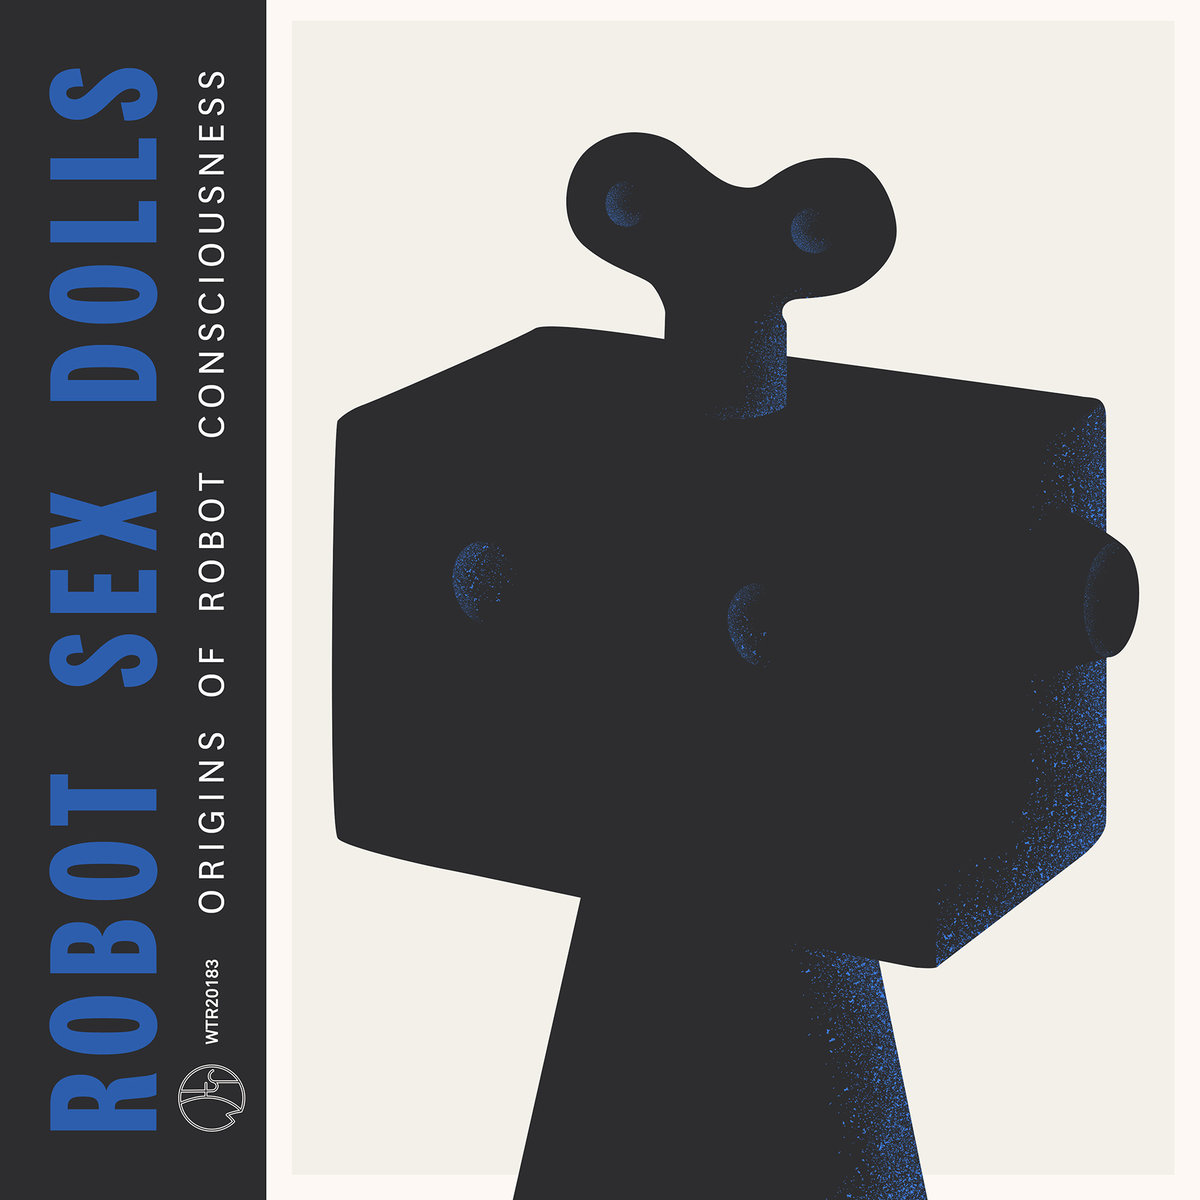 Robot Sex Dolls - "Origins of Robot Consciousness" [Recorded, Mixed and Mastered (JP), WTR]